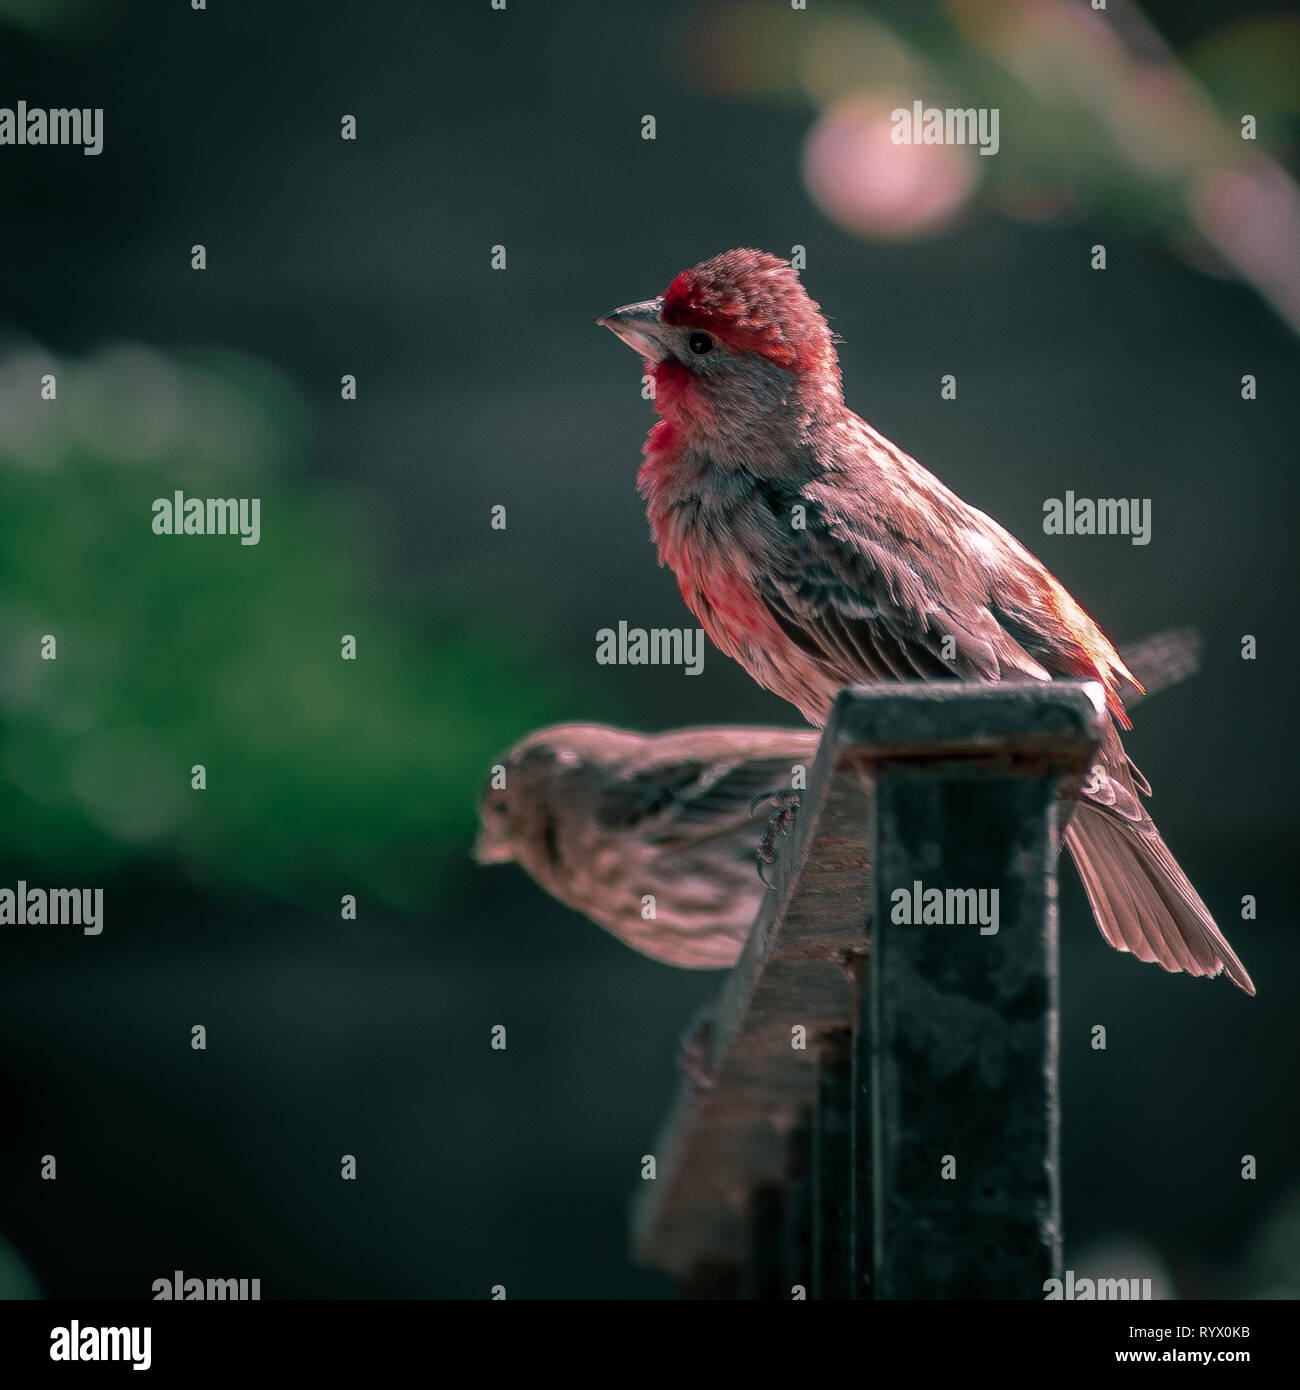 A purple finch resting on a rusted wrought iron fence. Red breasted bird resting on a fence during a bright spring day. Stock Photo